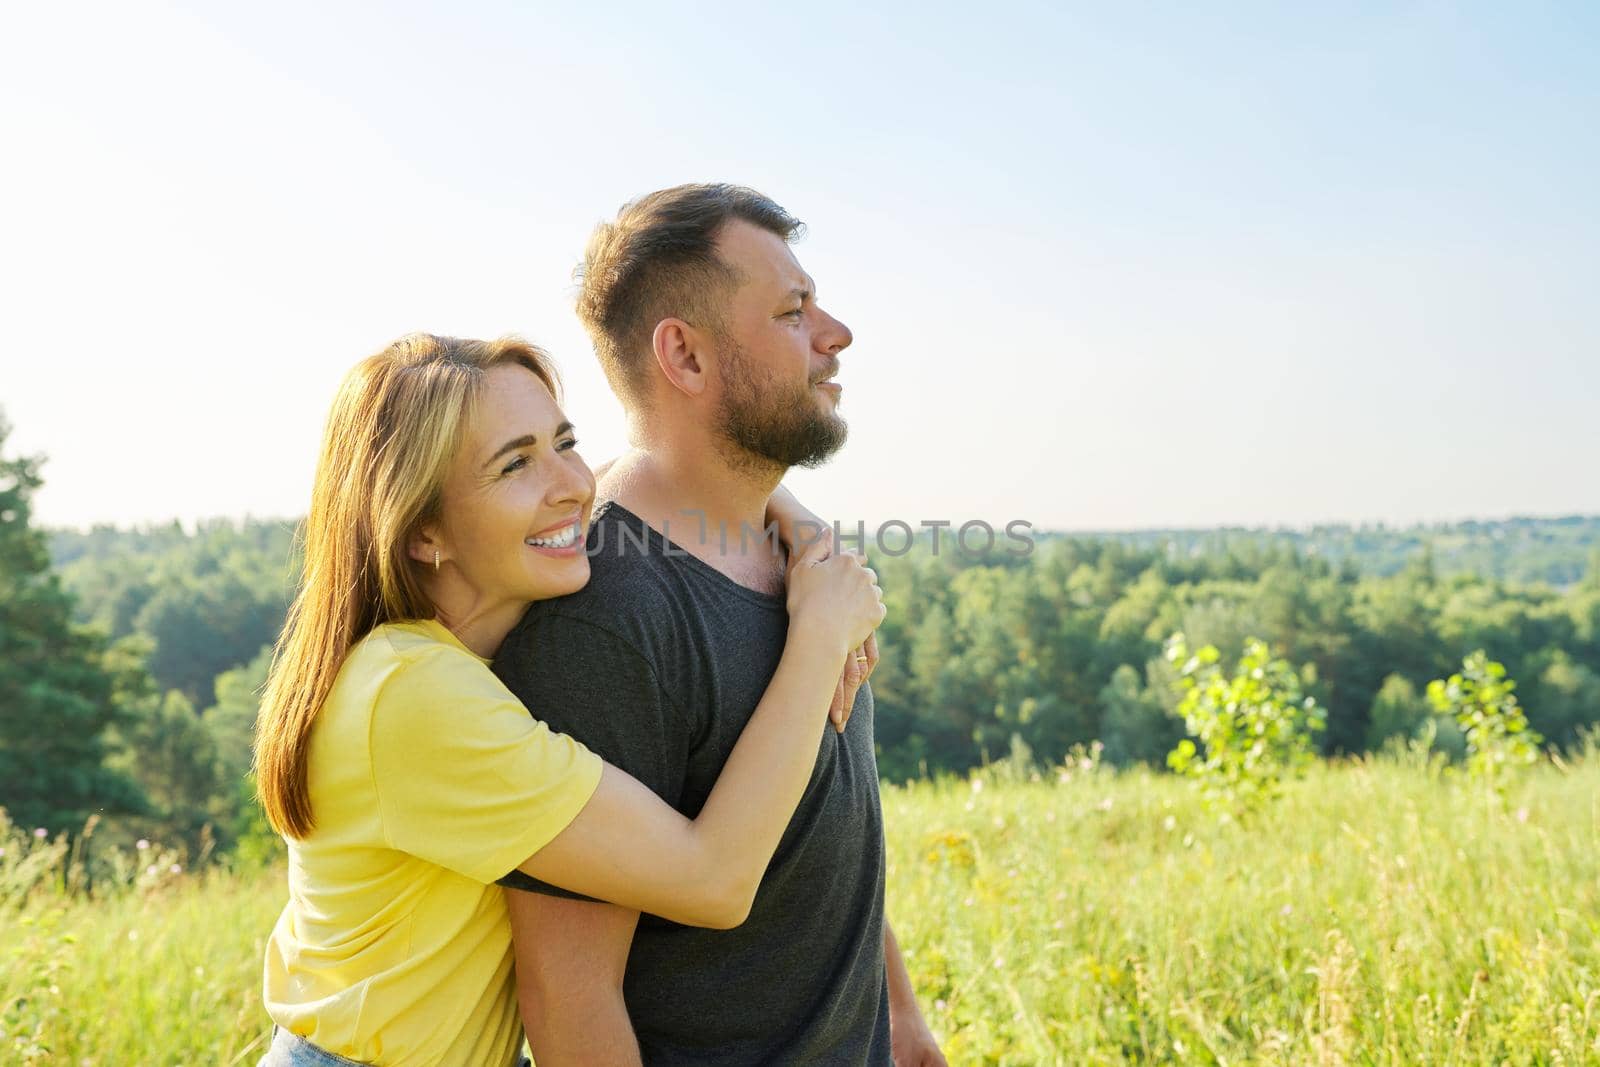 Portrait of happy middle-aged couple on summer sunny day. Beautiful people man and woman embracing in nature, family, happiness, holidays, joy concept. Copy space